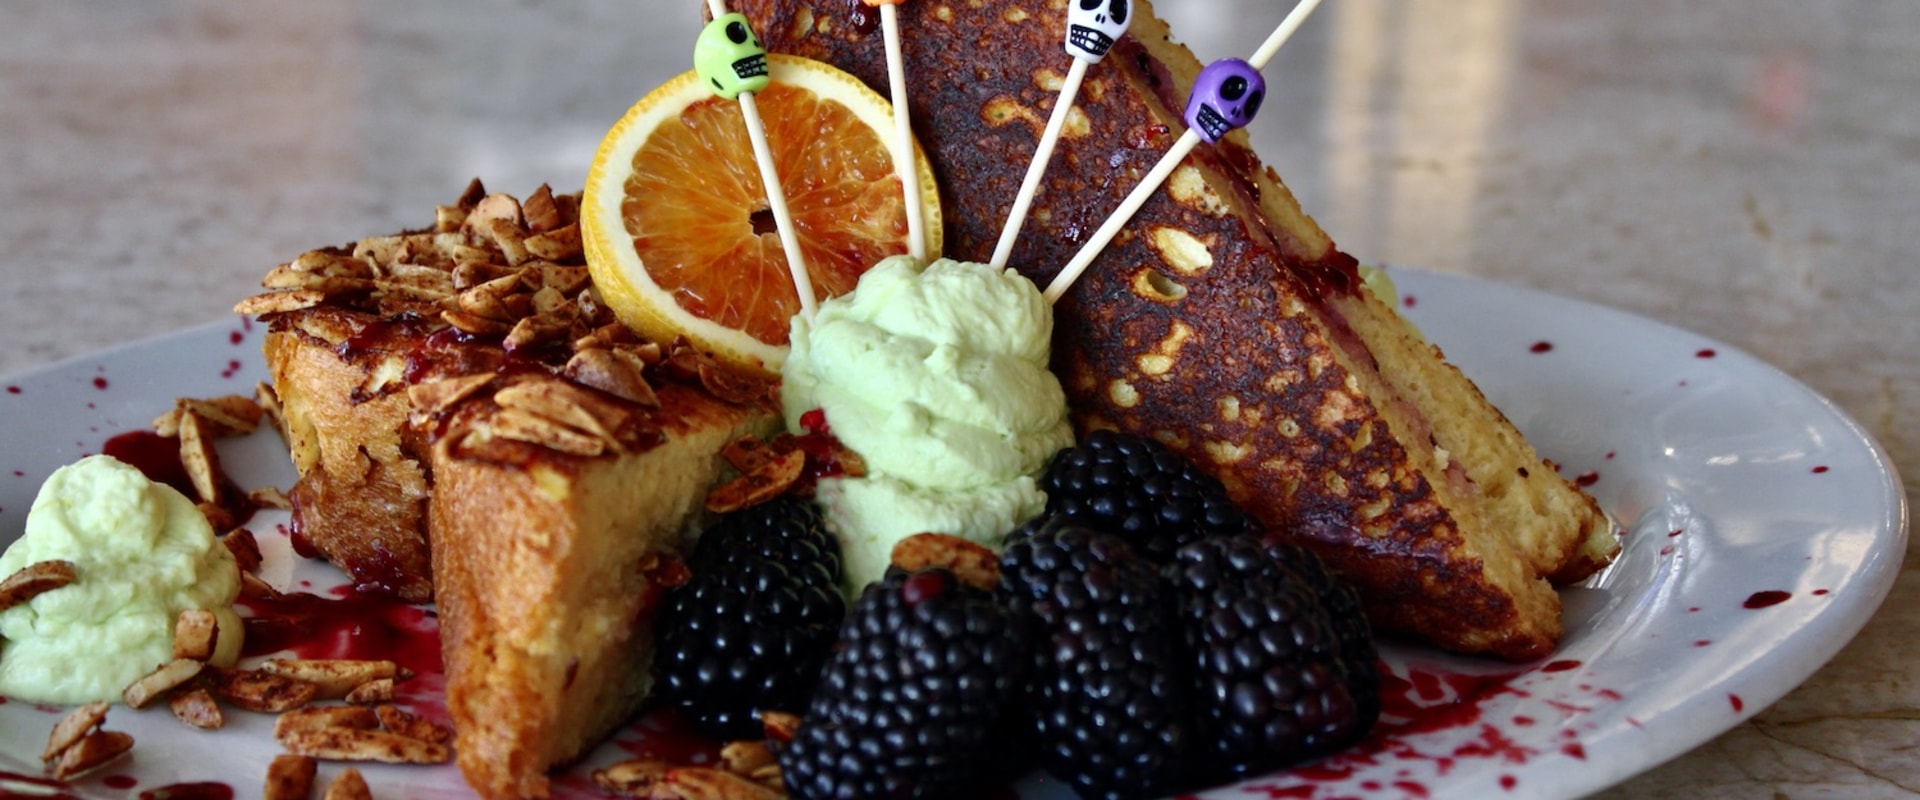 Experience the Delicious Upcoming Food Festivals in Chandler, AZ